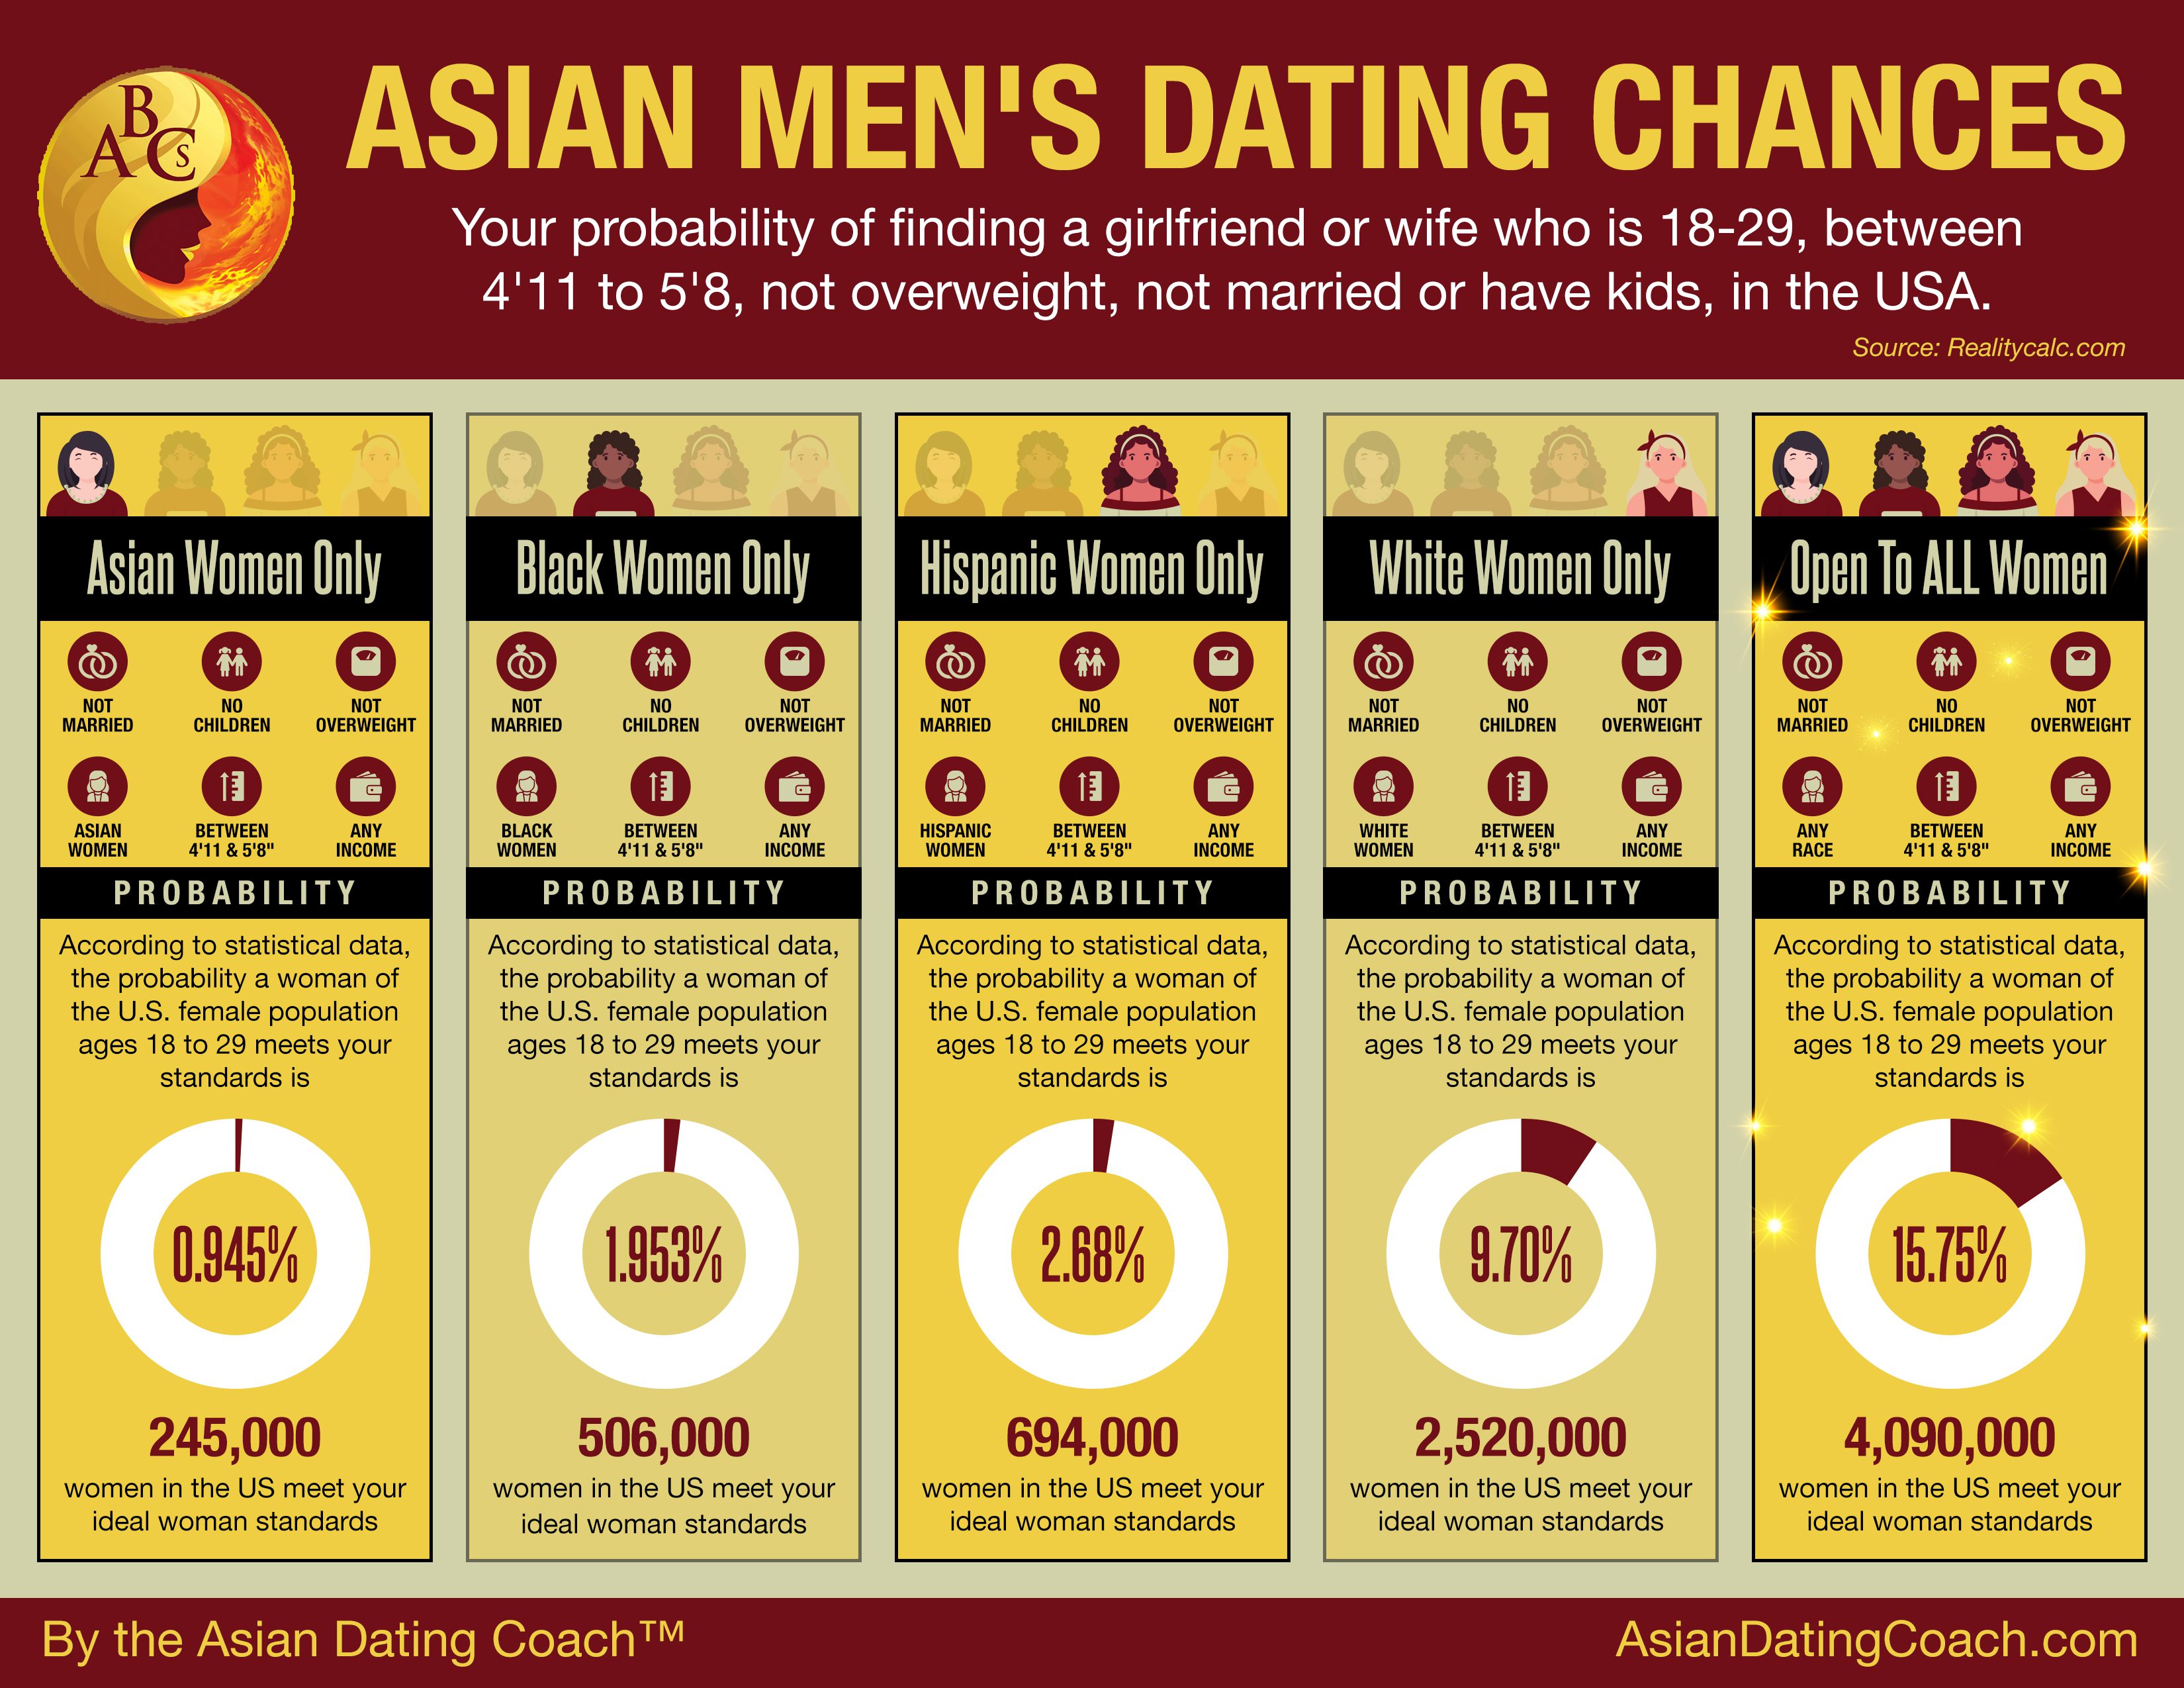 Asian Men's Dating Chances of Getting a Girlfriend or Wife By Race